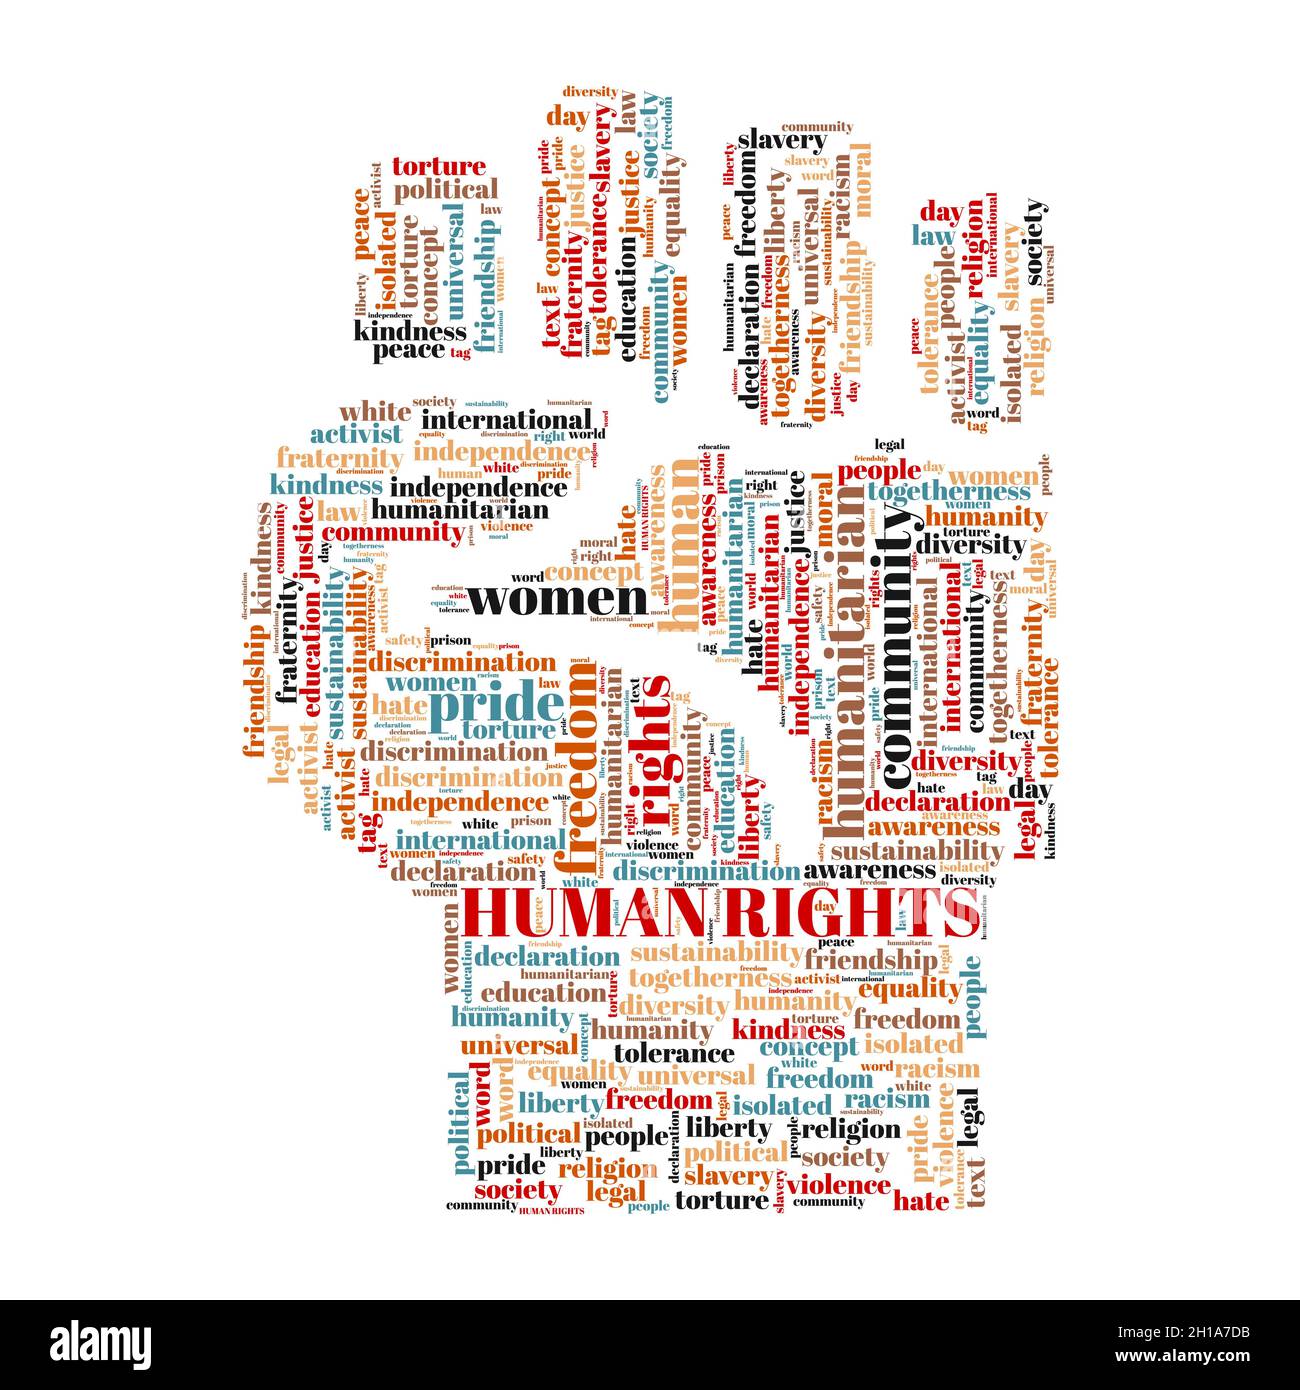 Human rights word cloud concept with hand symbol. Stock Vector